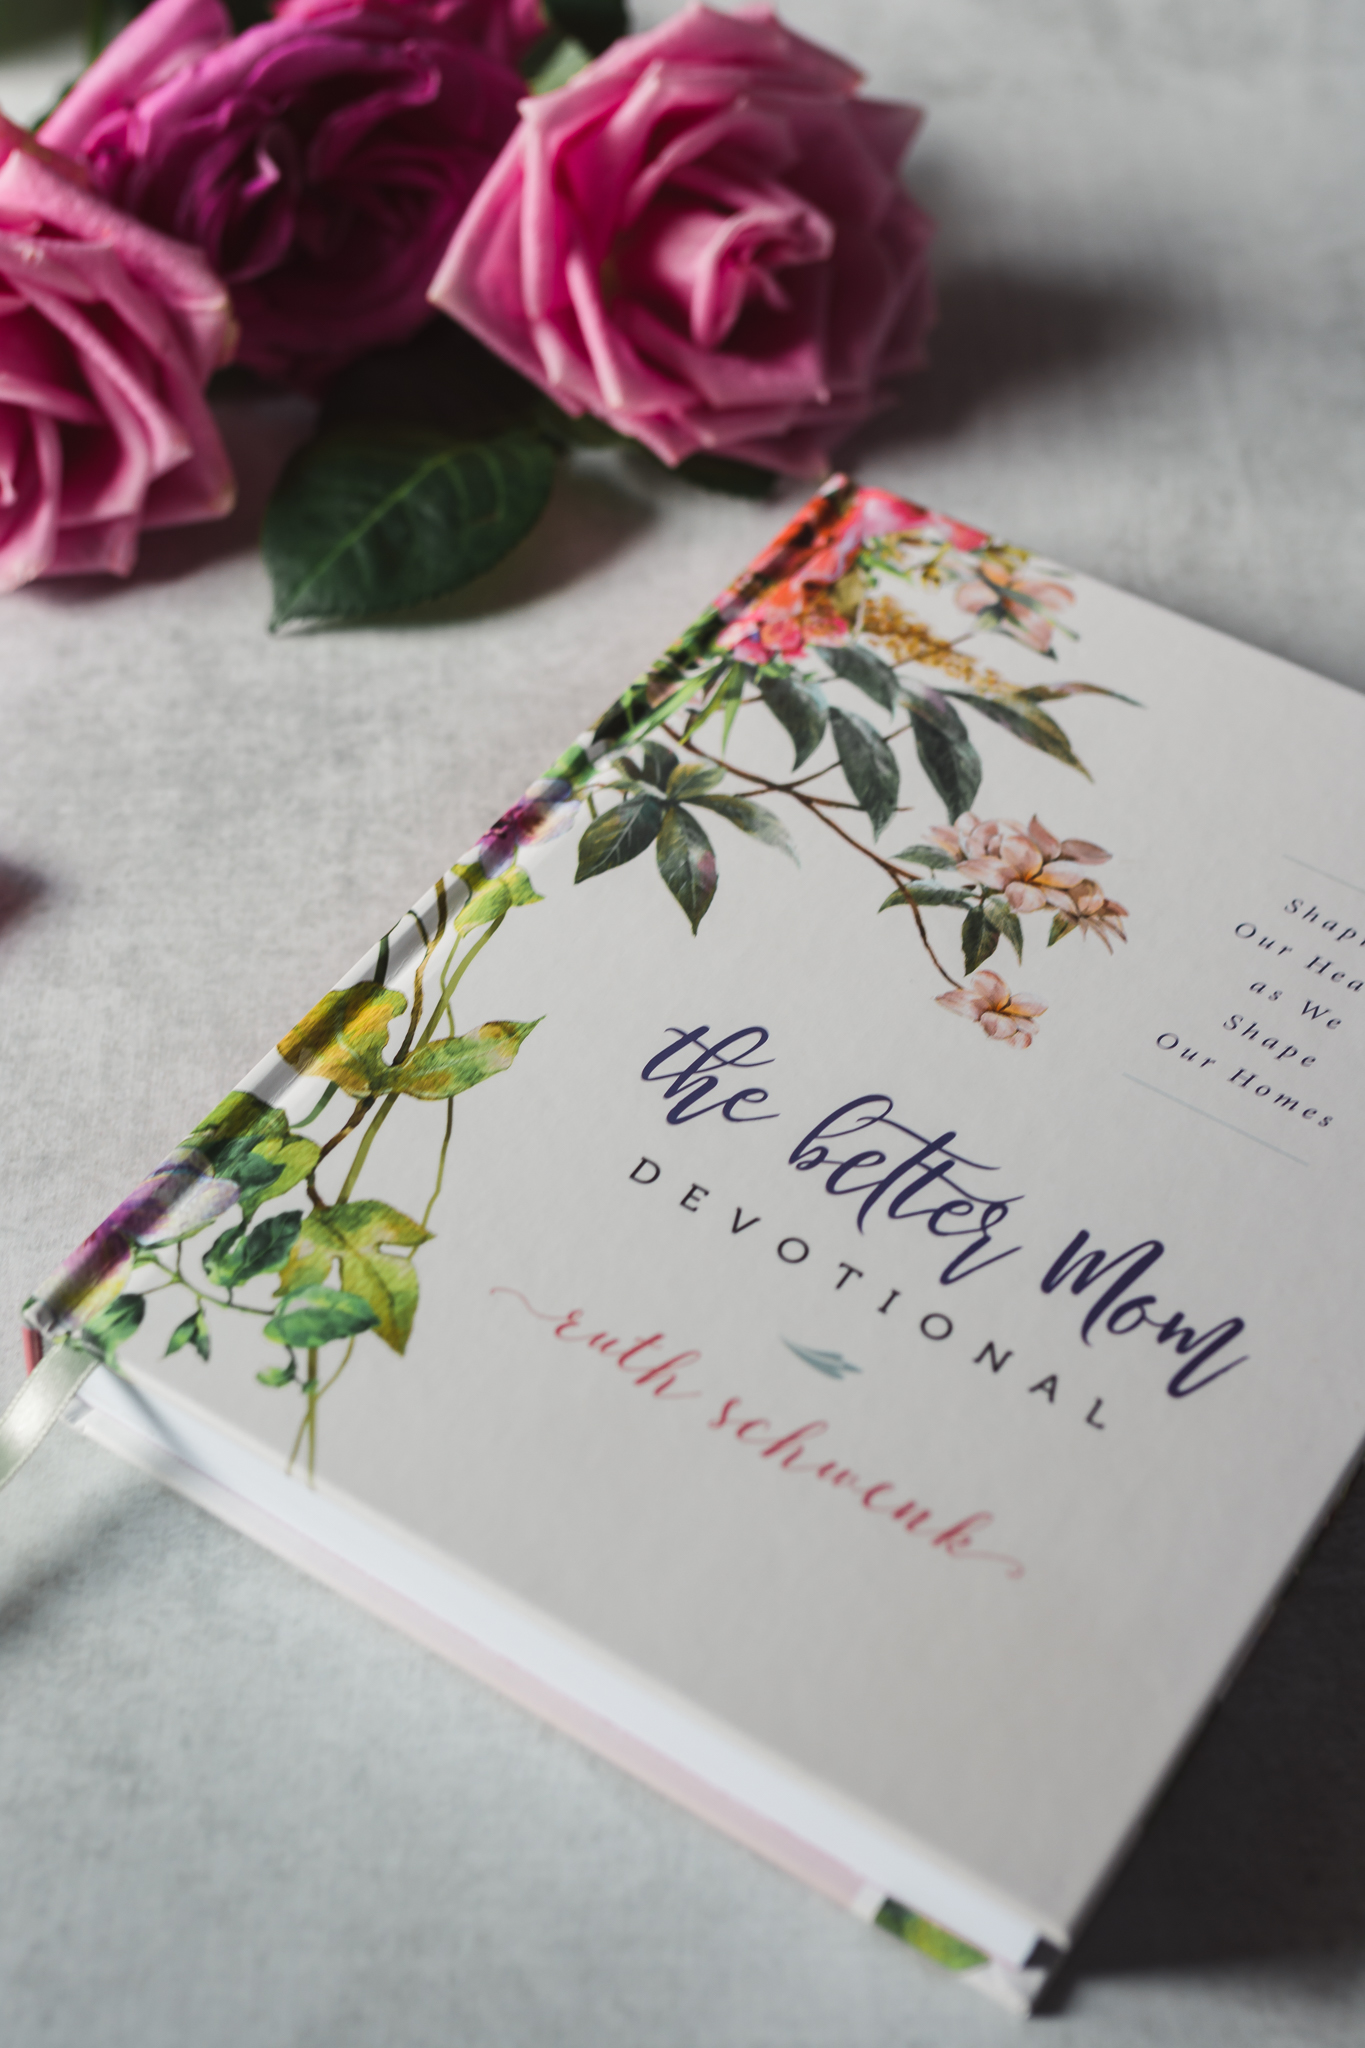 Looking for some encouragement today? Come grab your copy of the The Better Mom Devotional!